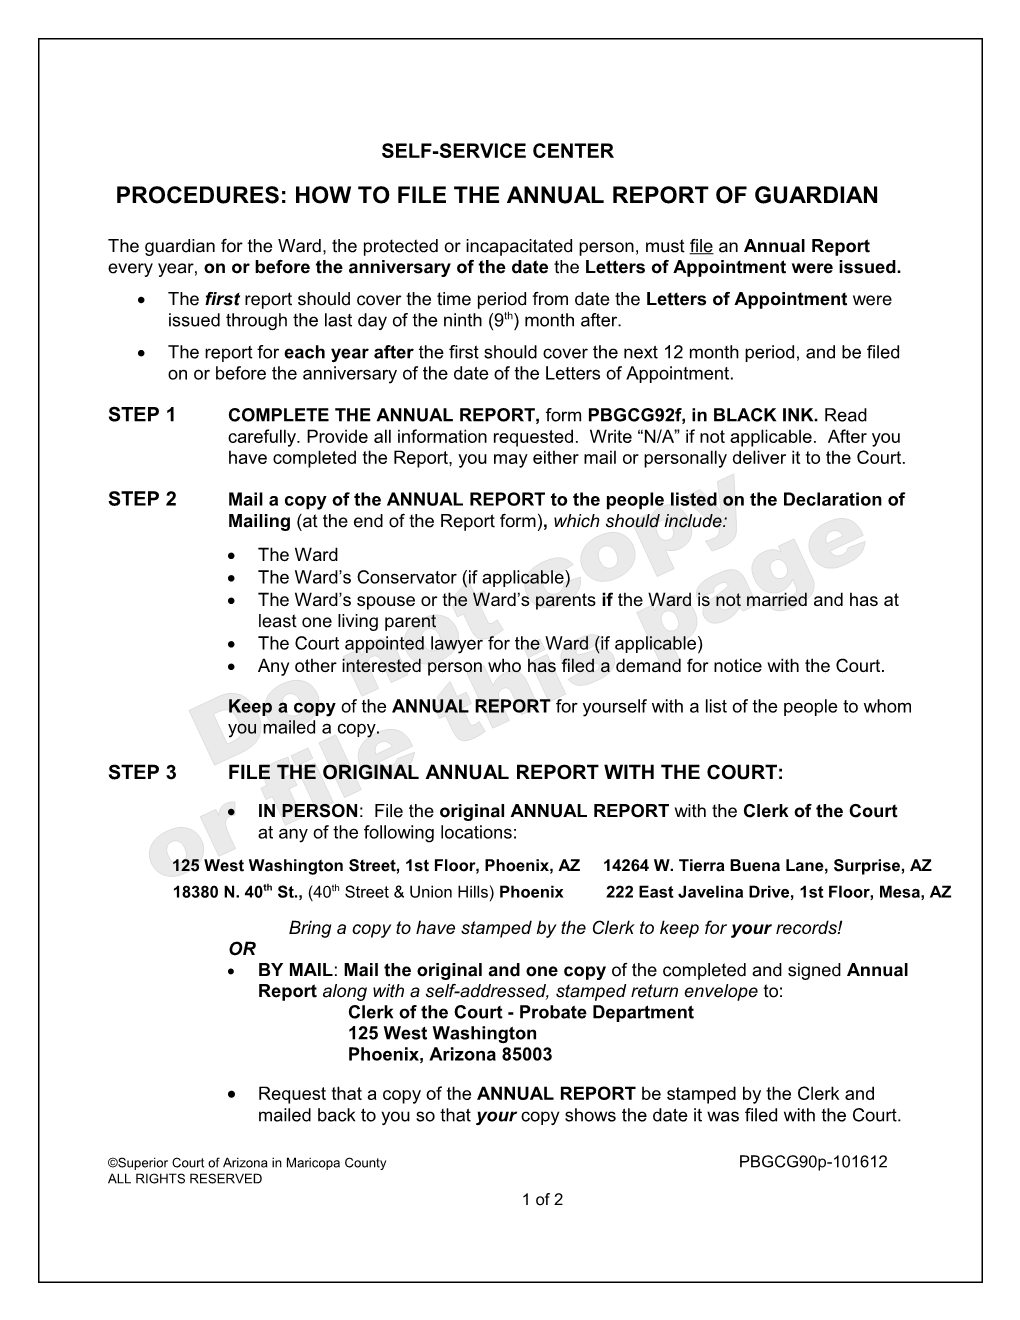 Procedures: How to File the Annual Reportof Guardian